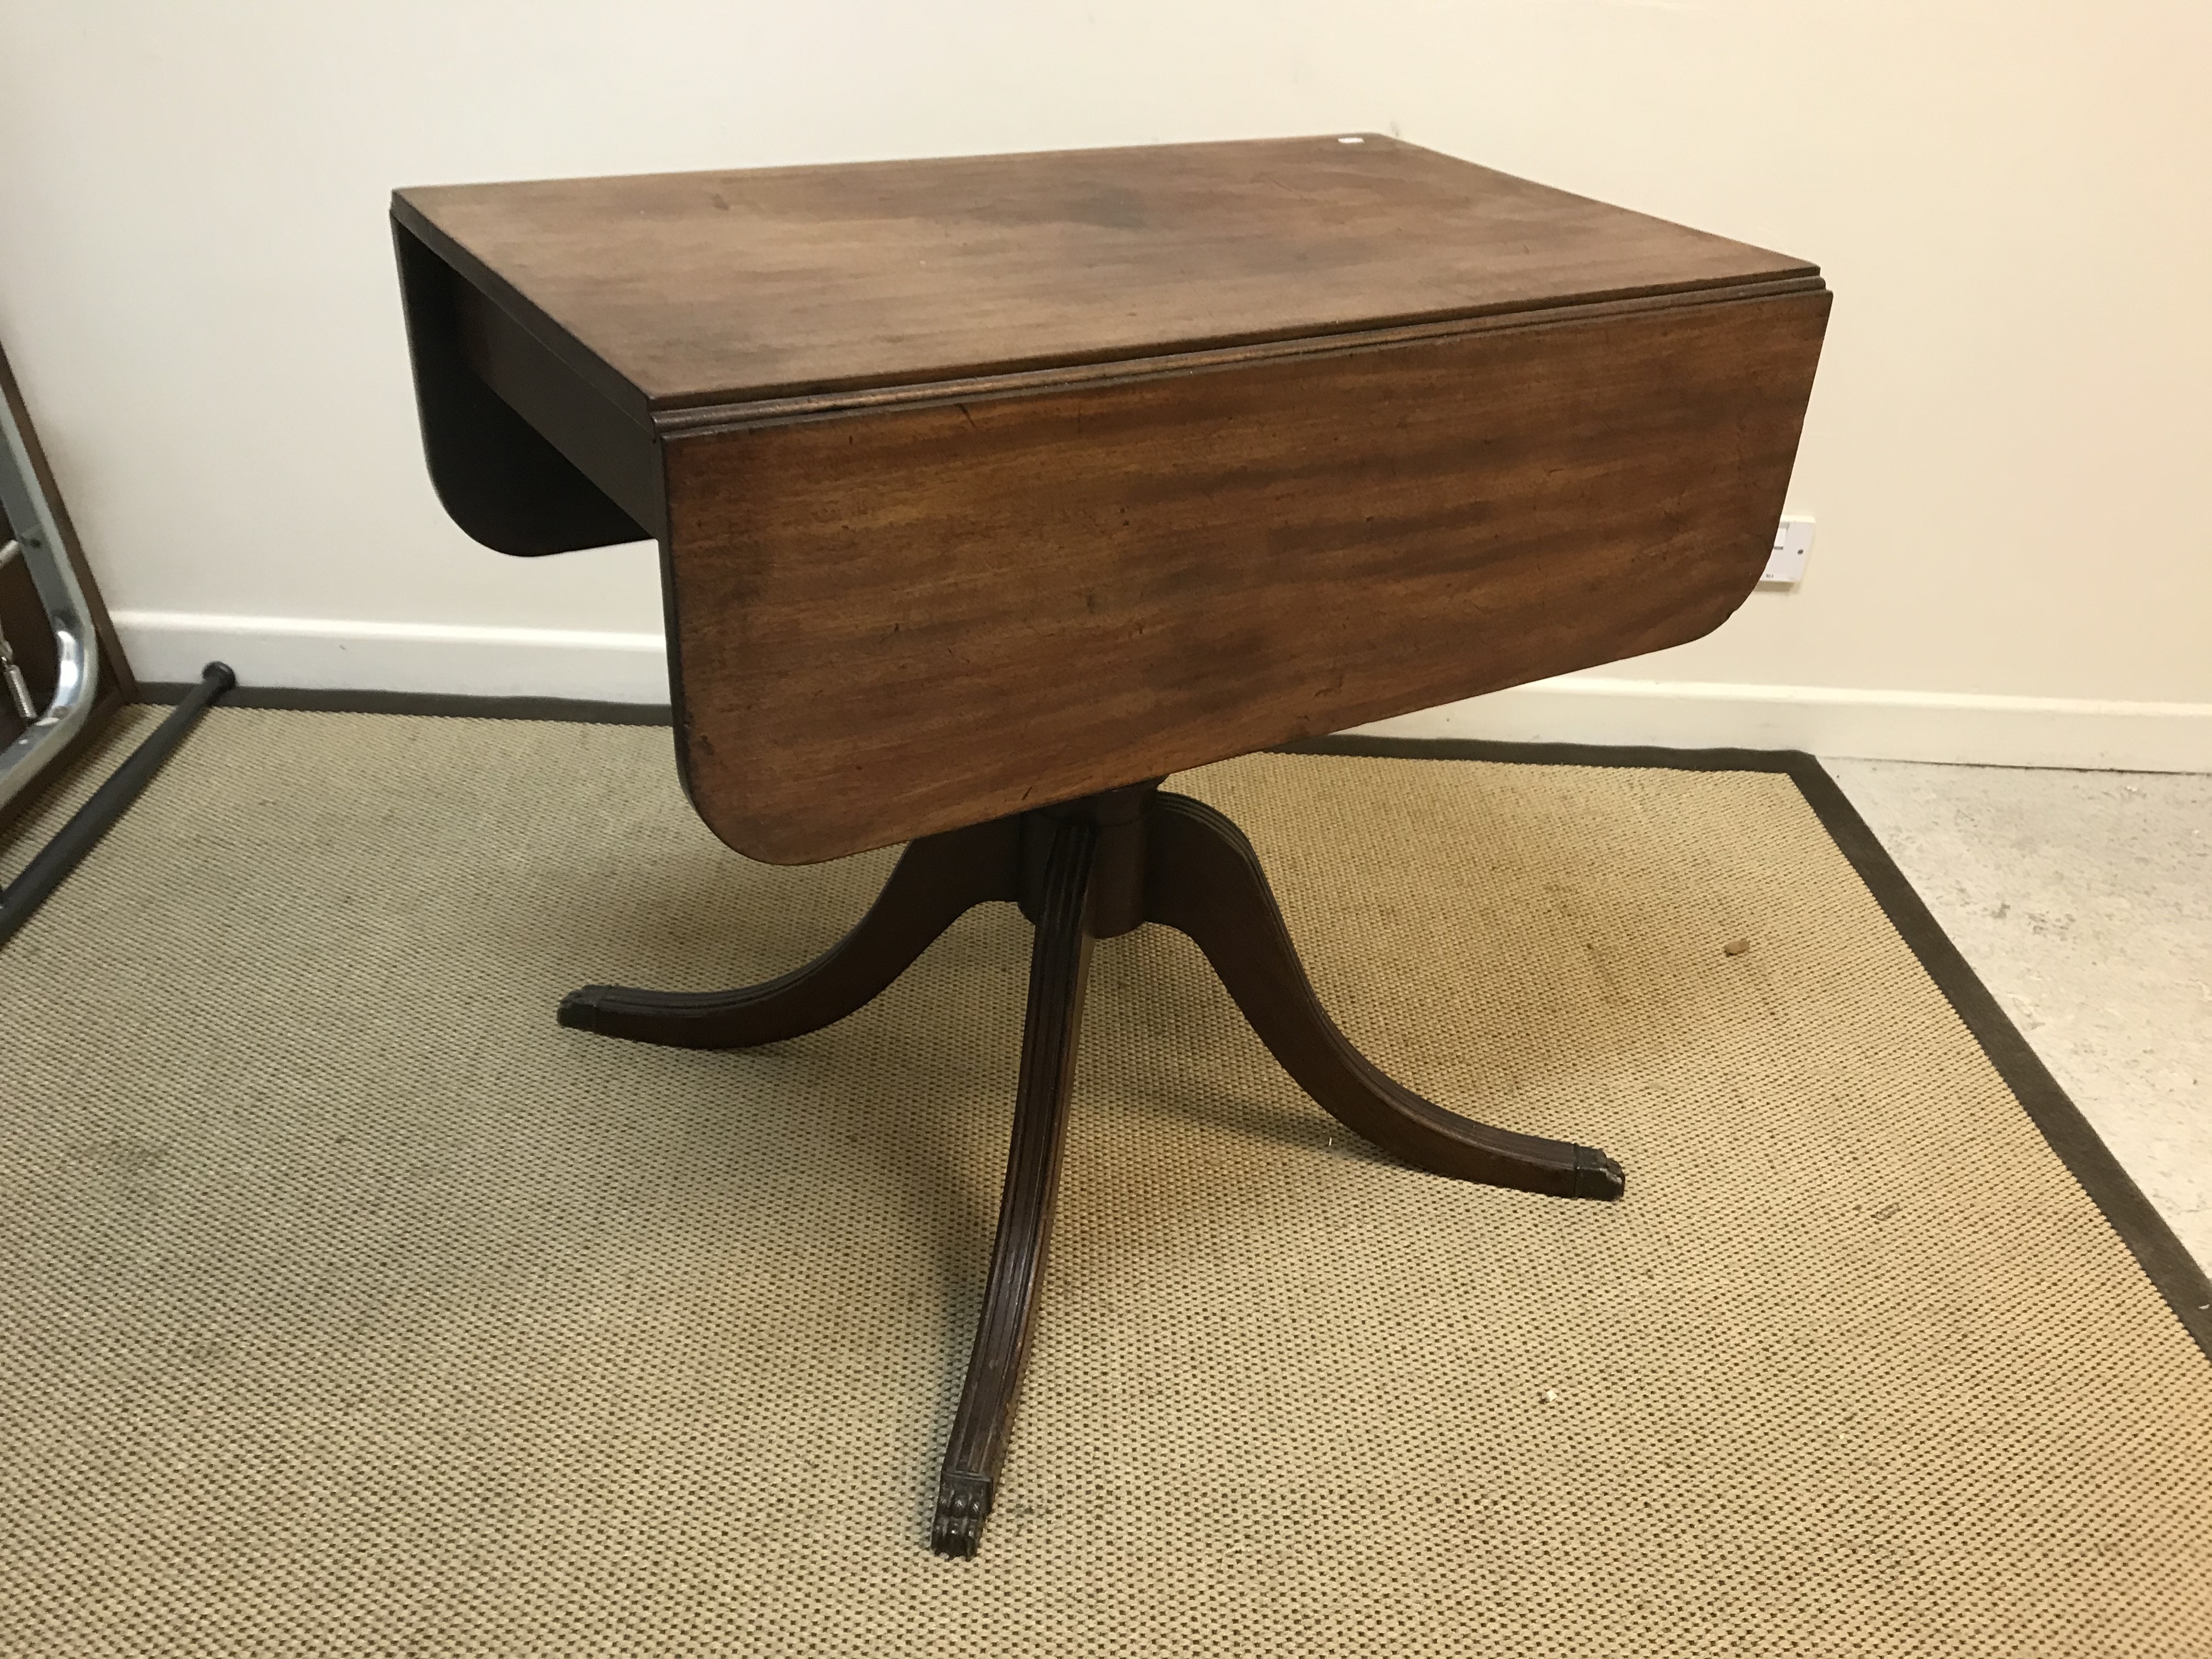 A 19th Century mahogany Pembroke table, the rounded rectangular drop-leaf top on a central turned